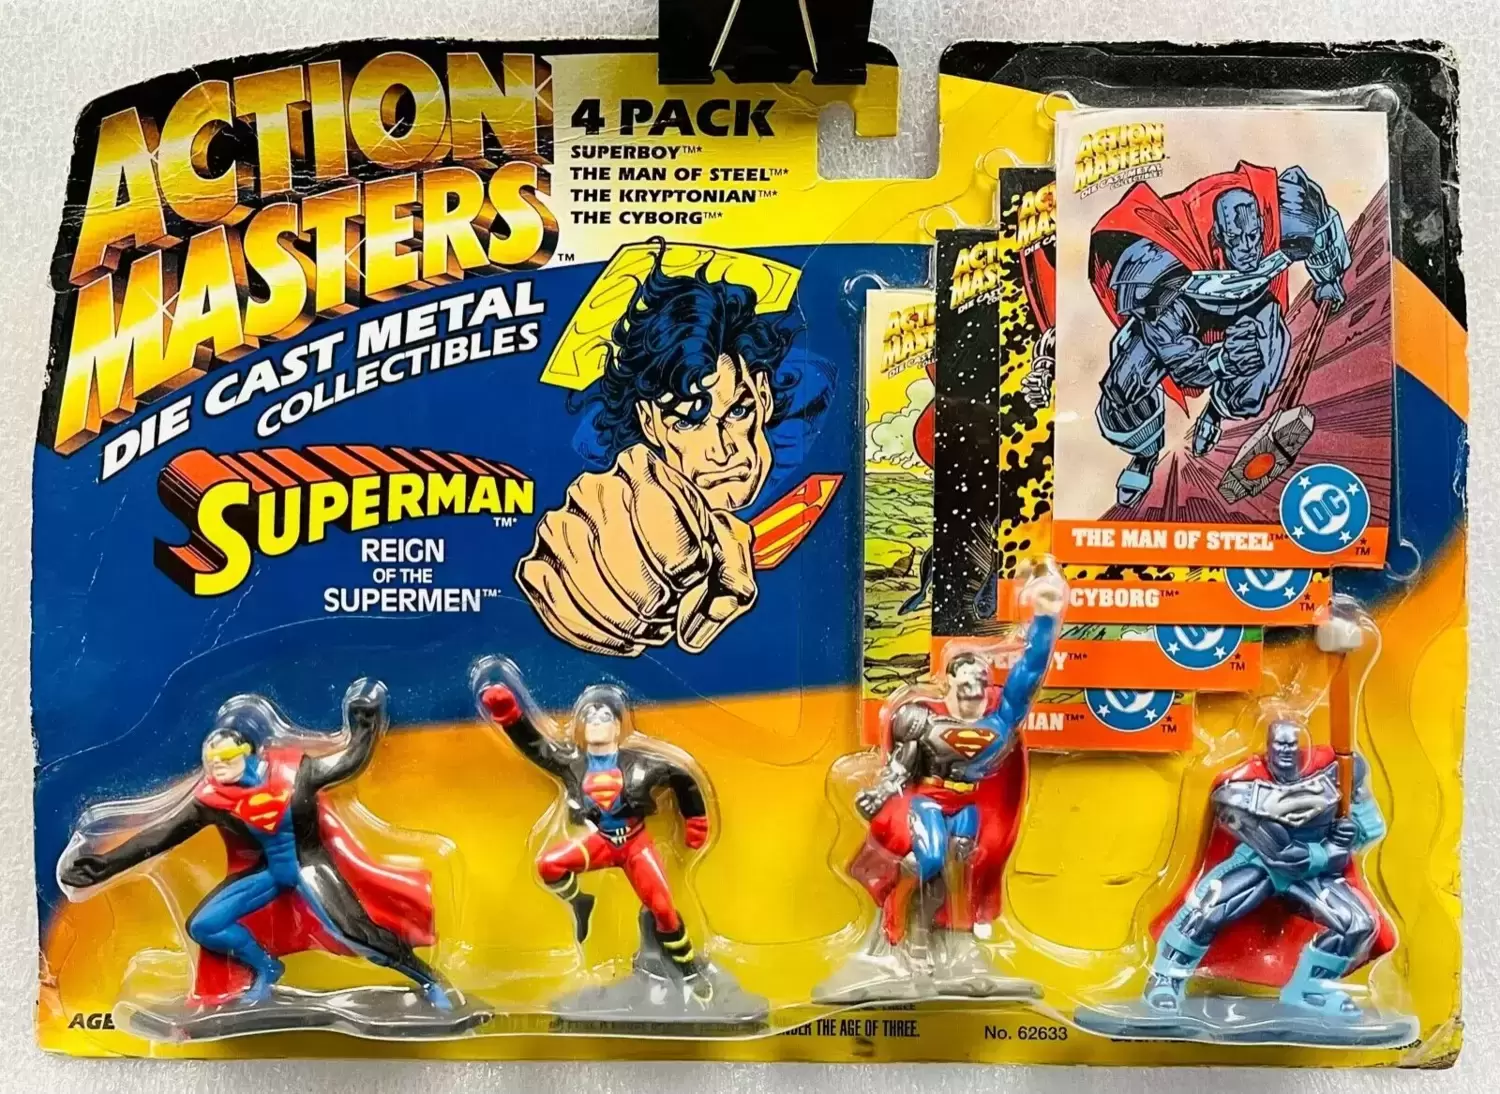 Action Masters - Die Cast Metal Collectibles - Superman - Superboy, The Man of Steel, The Kryptonian & The Cyborg 4 Pack